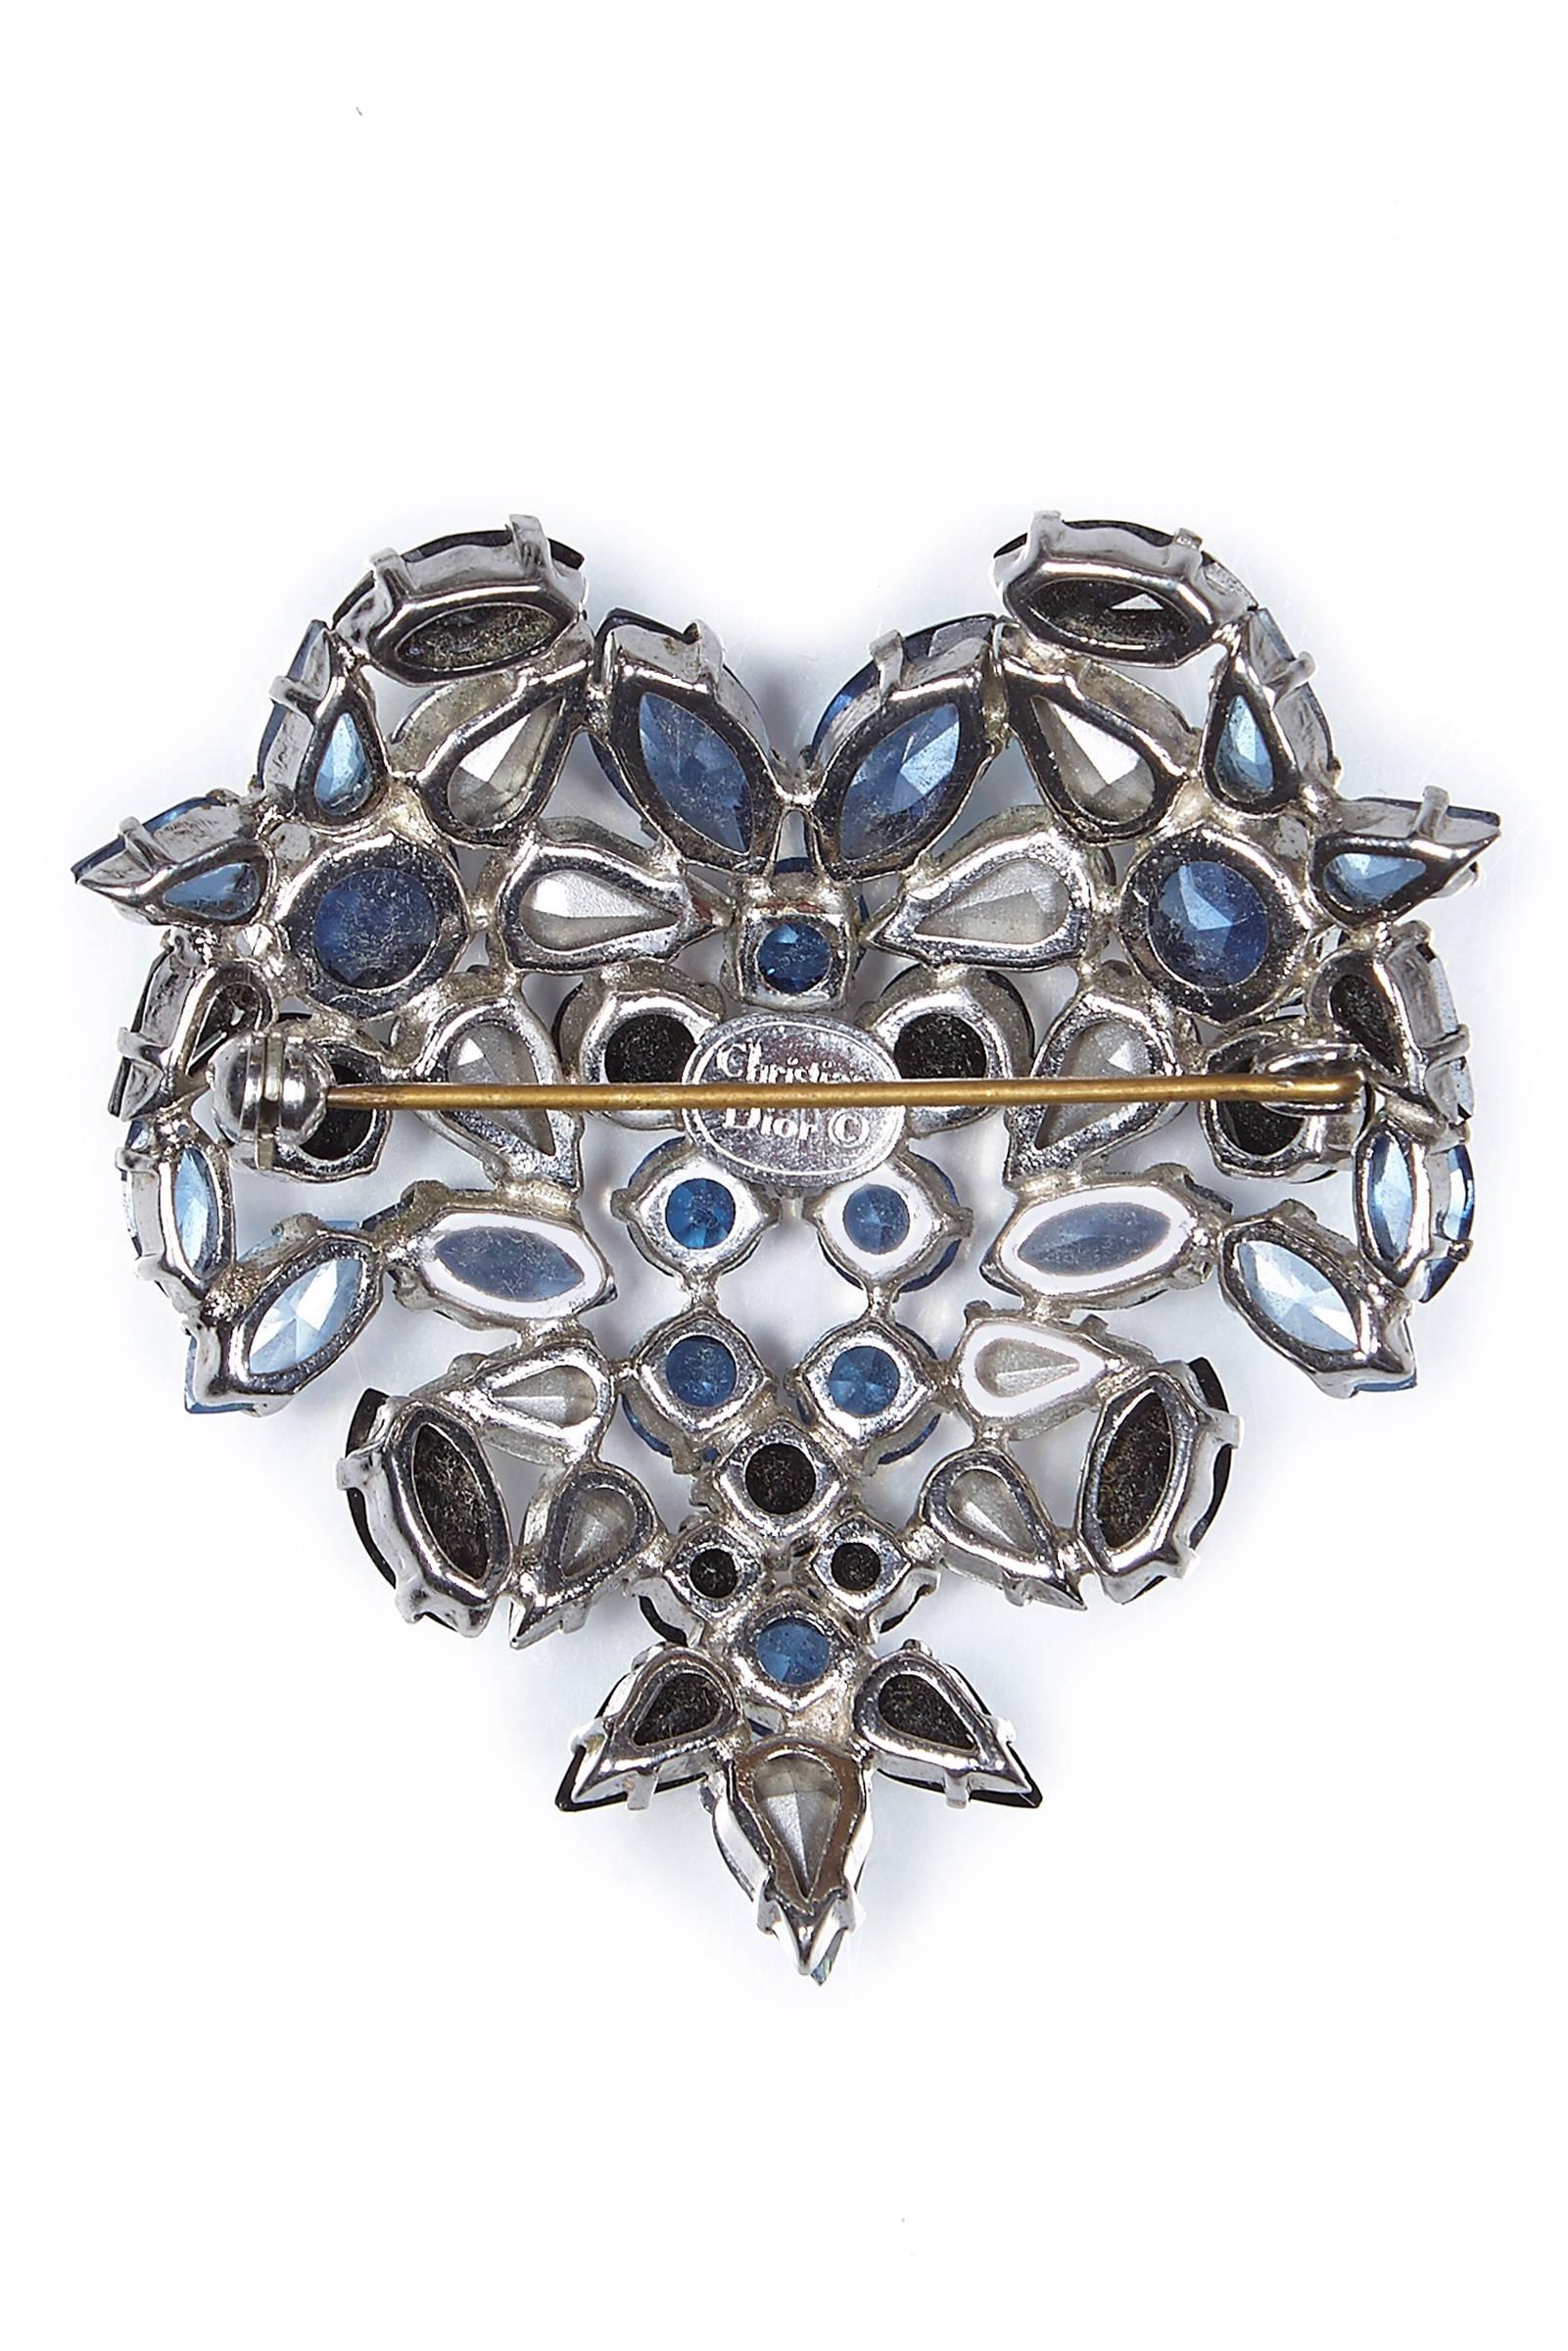 This ornate 1950s Christian Dior heart-shaped Swarovski crystal brooch is a fully documented and sort after design by Henkel and Grosse circa 1958.  The exquisite prong-set marquise, pear and round-cut rhinestone crystals are arranged in a heart